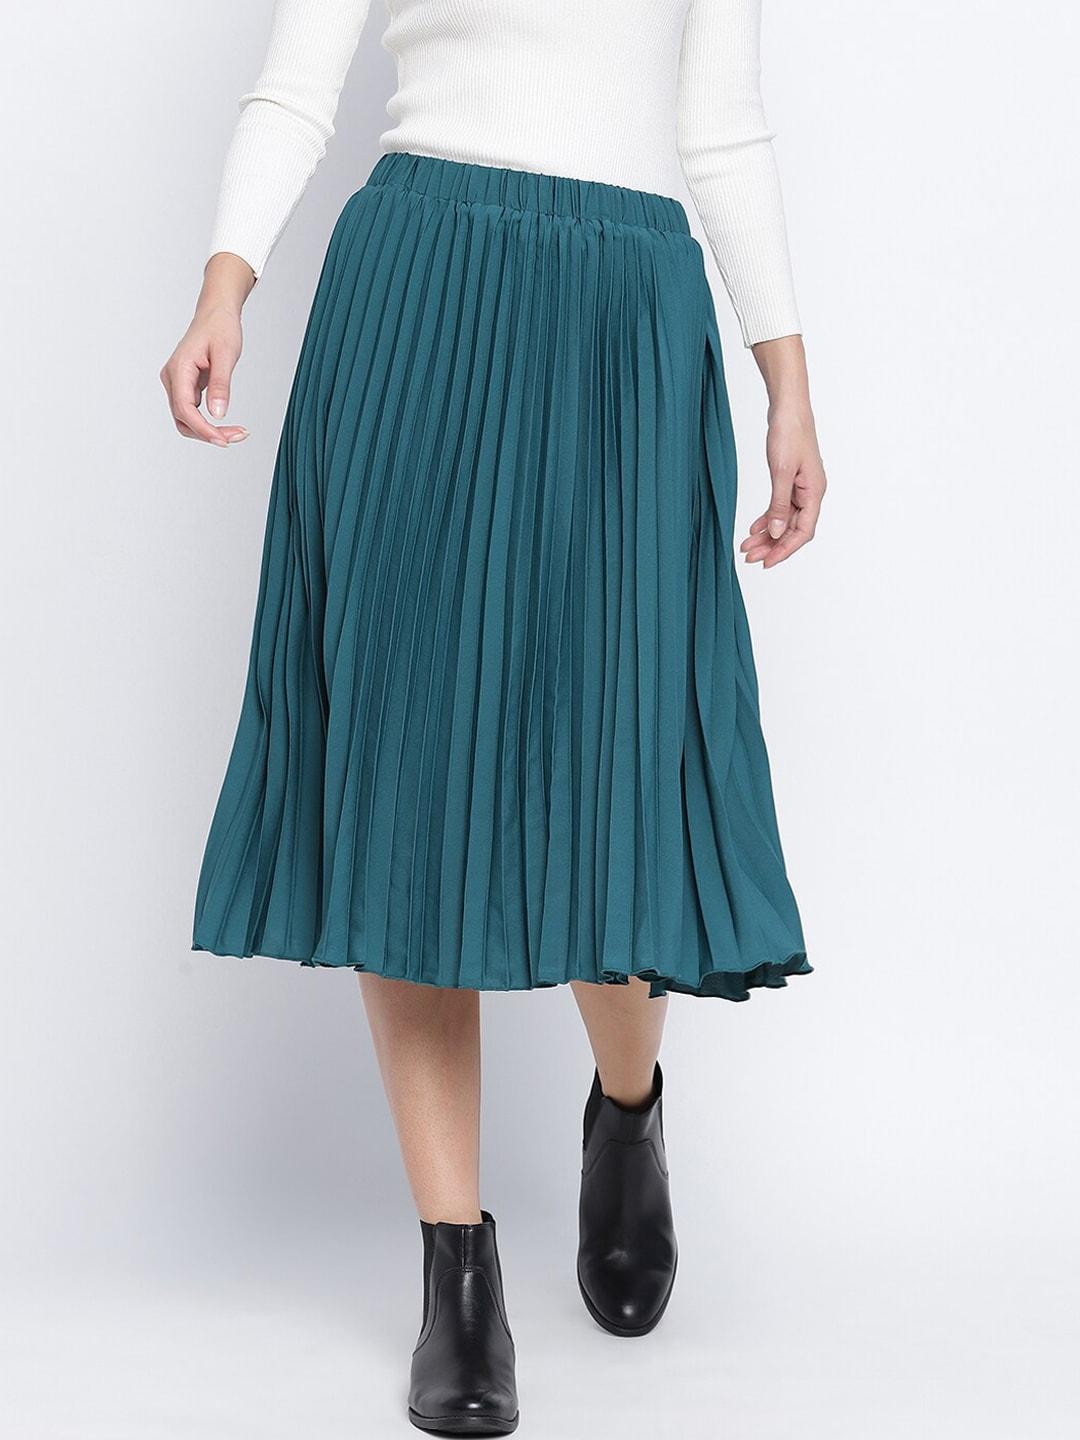 oxolloxo women teal green coloured solid midi-length pleated skirt